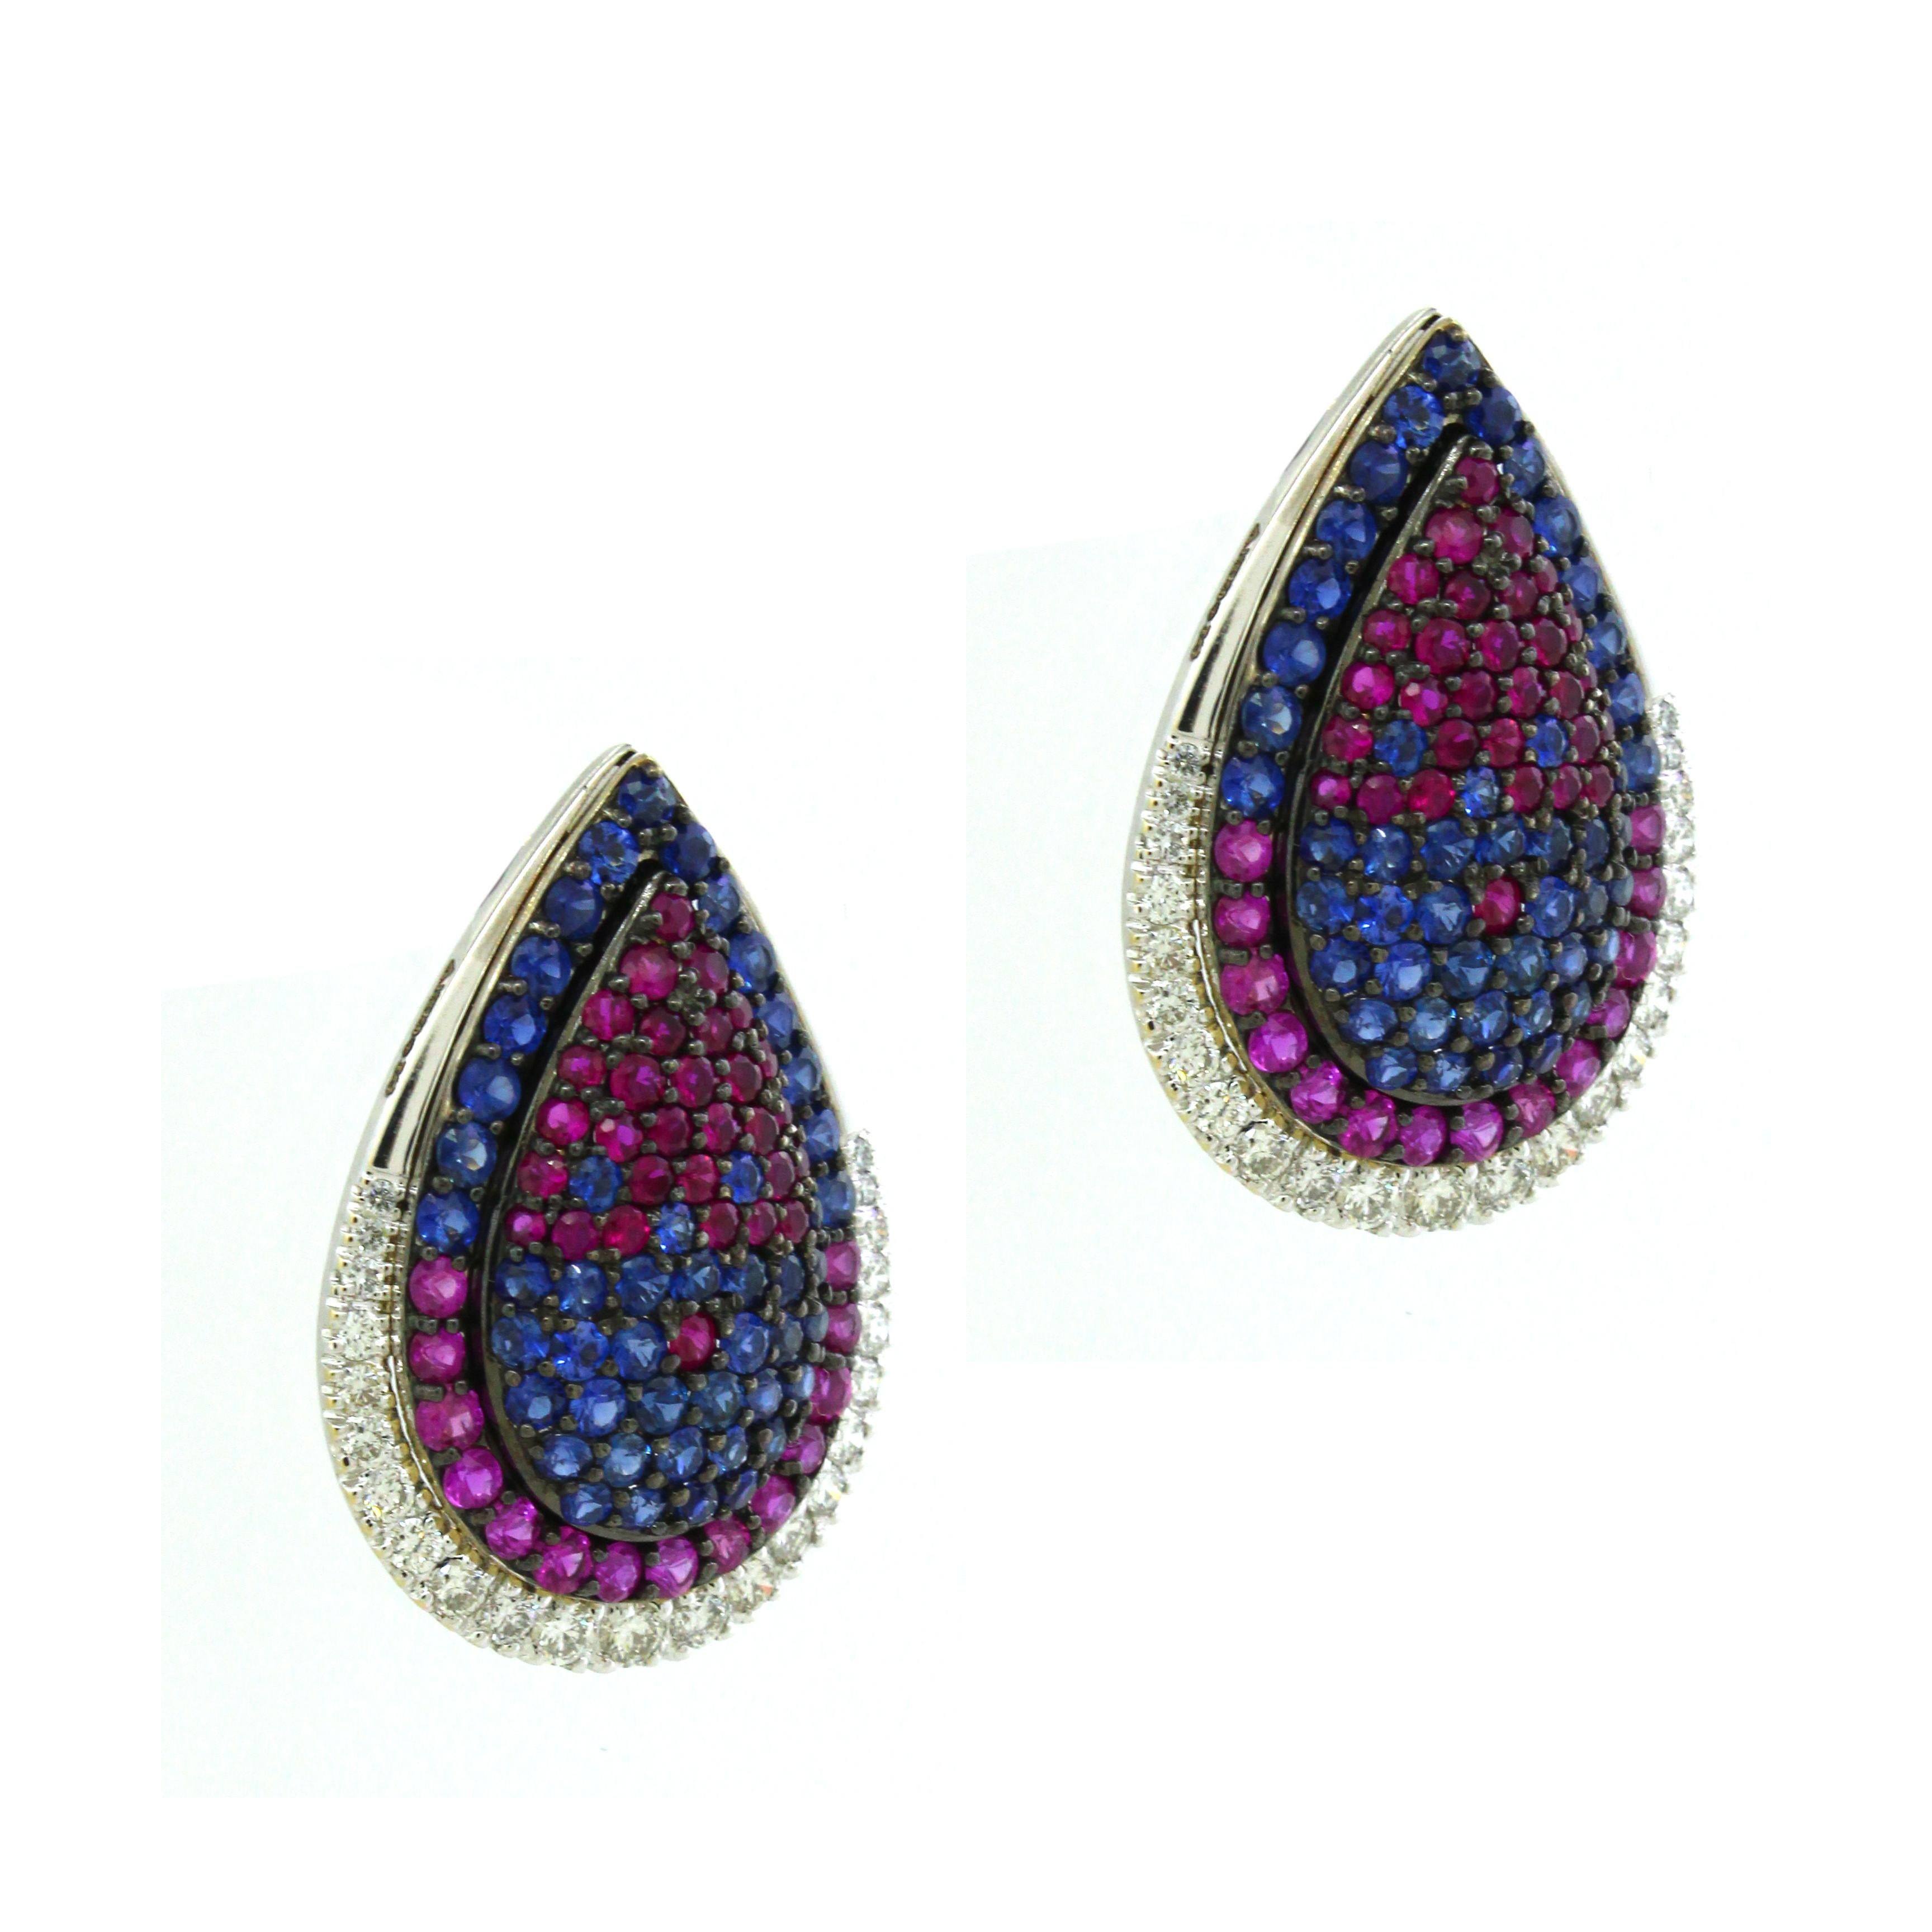 Modern 4.11 carats of Sapphire and Ruby Stud Earrings For Sale